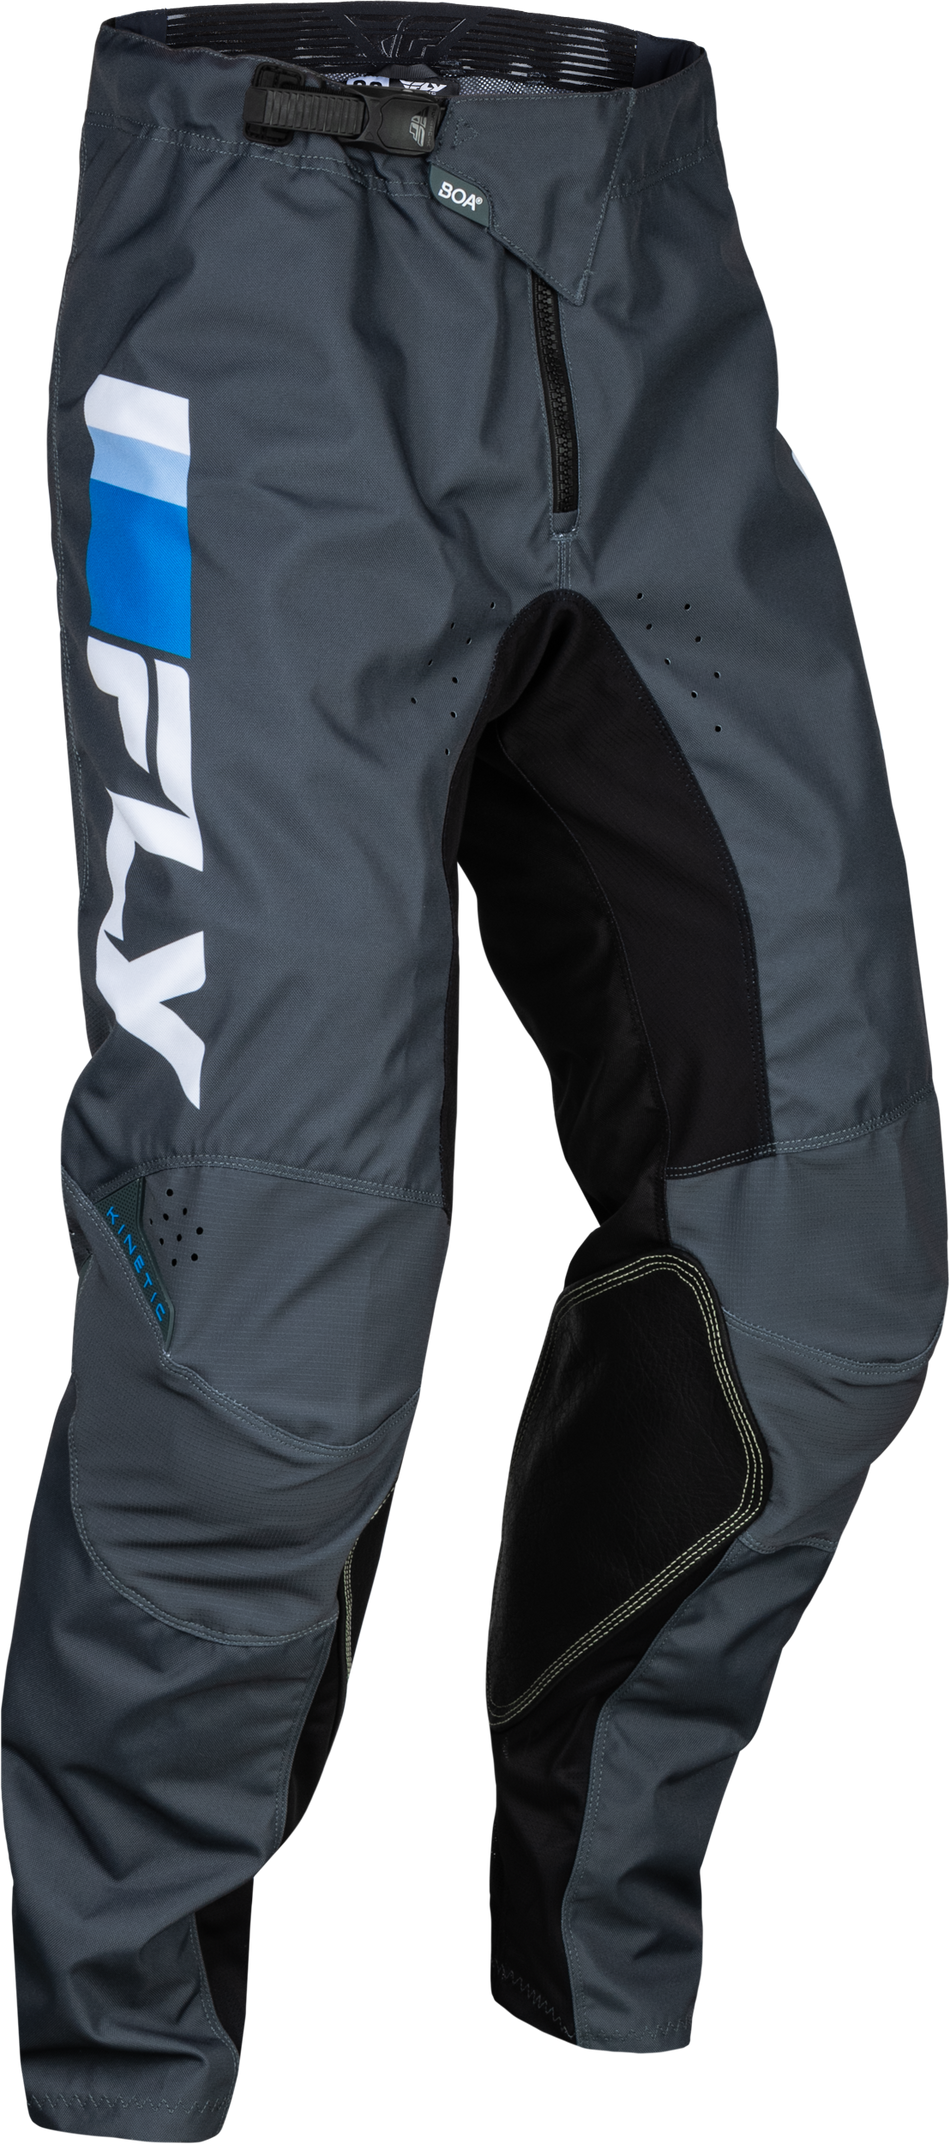 FLY RACING Youth Kinetic Prix Pants Bright Blue/Charcoal/Wht Sz 22 377-43022